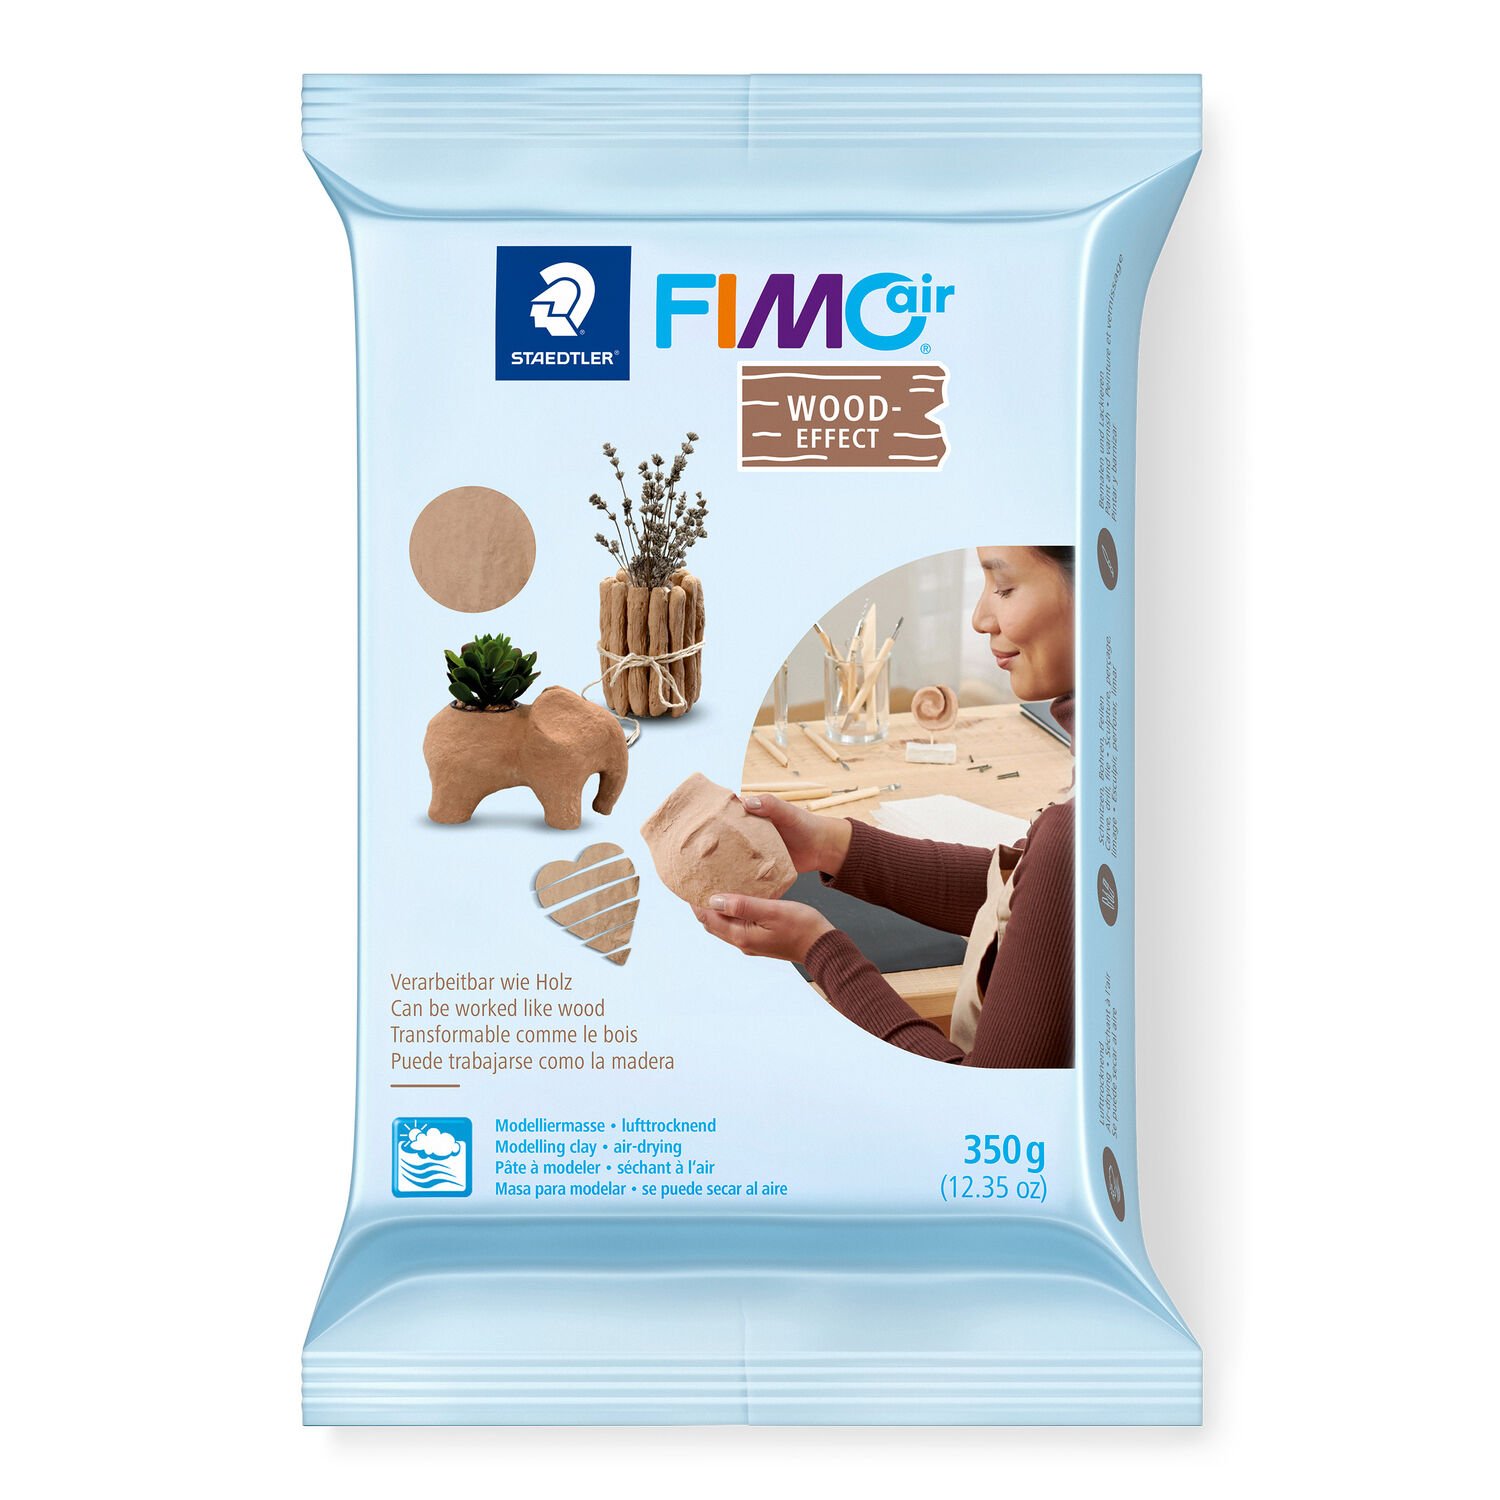 FIMO®air wood-effect 8150 - Air-drying modelling clay